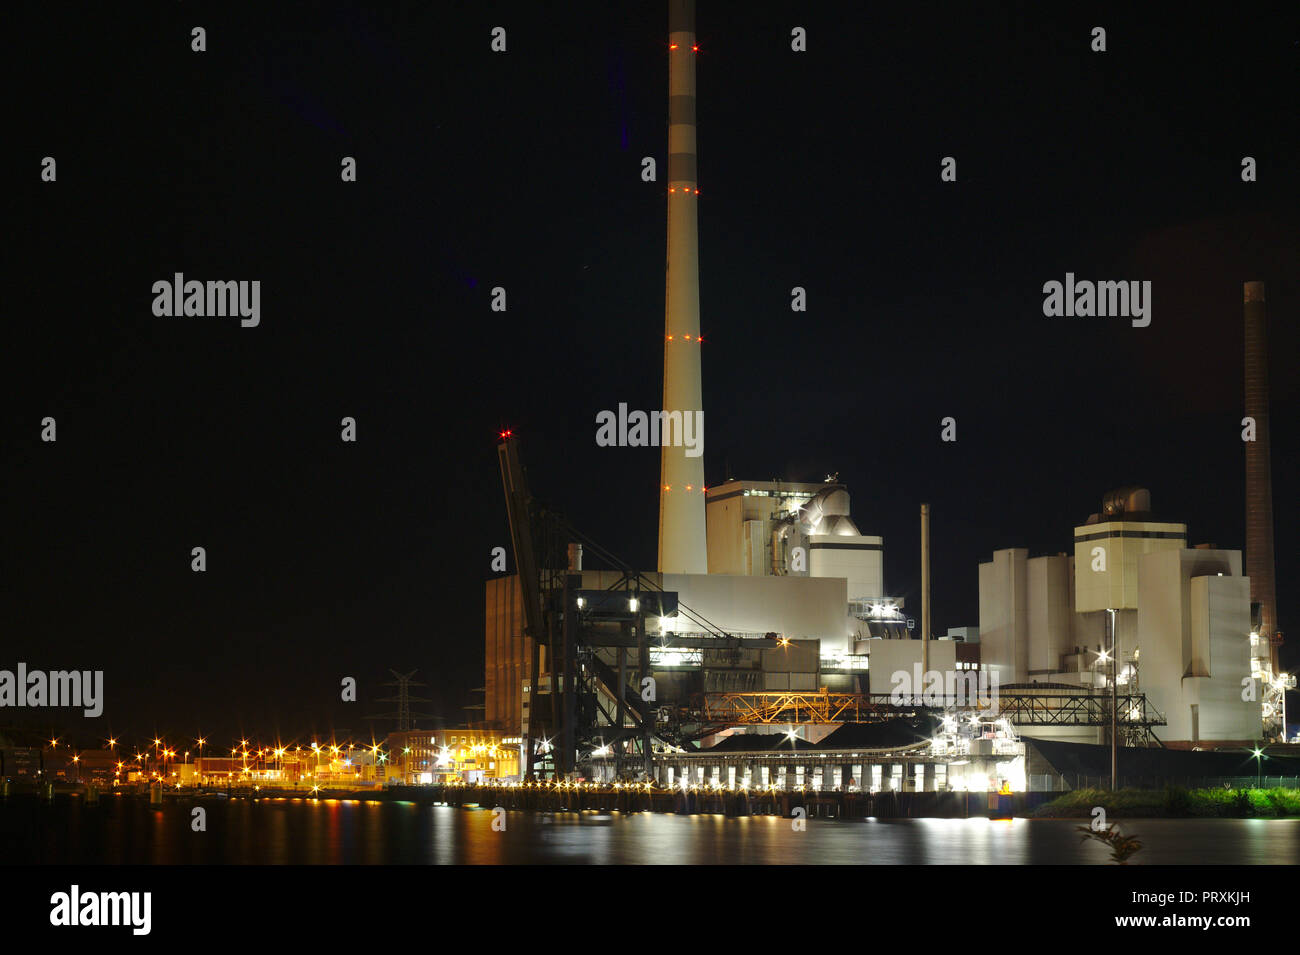 Bremen ports night Stadtwerke with lights energy for the city coal power plants Stock Photo